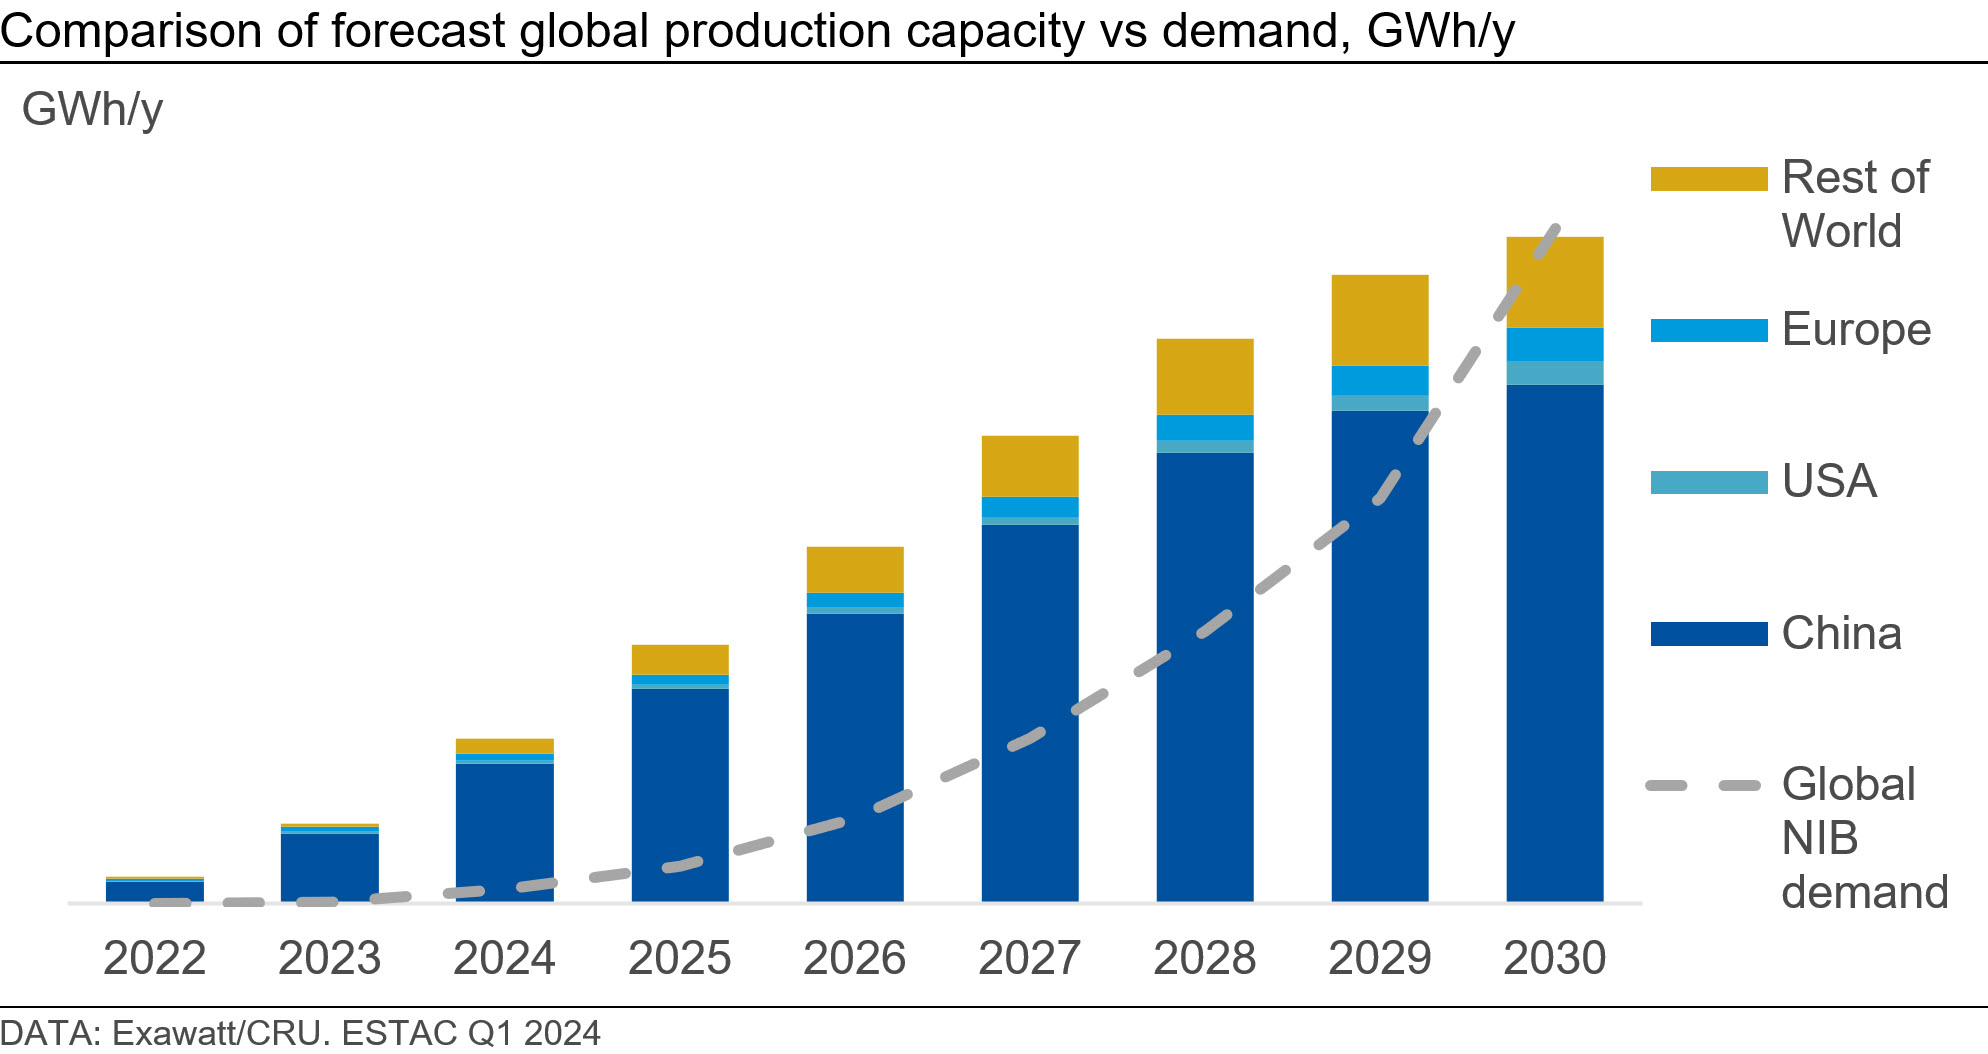 Comparison of forecast global production capacity vs demand, GWh/y